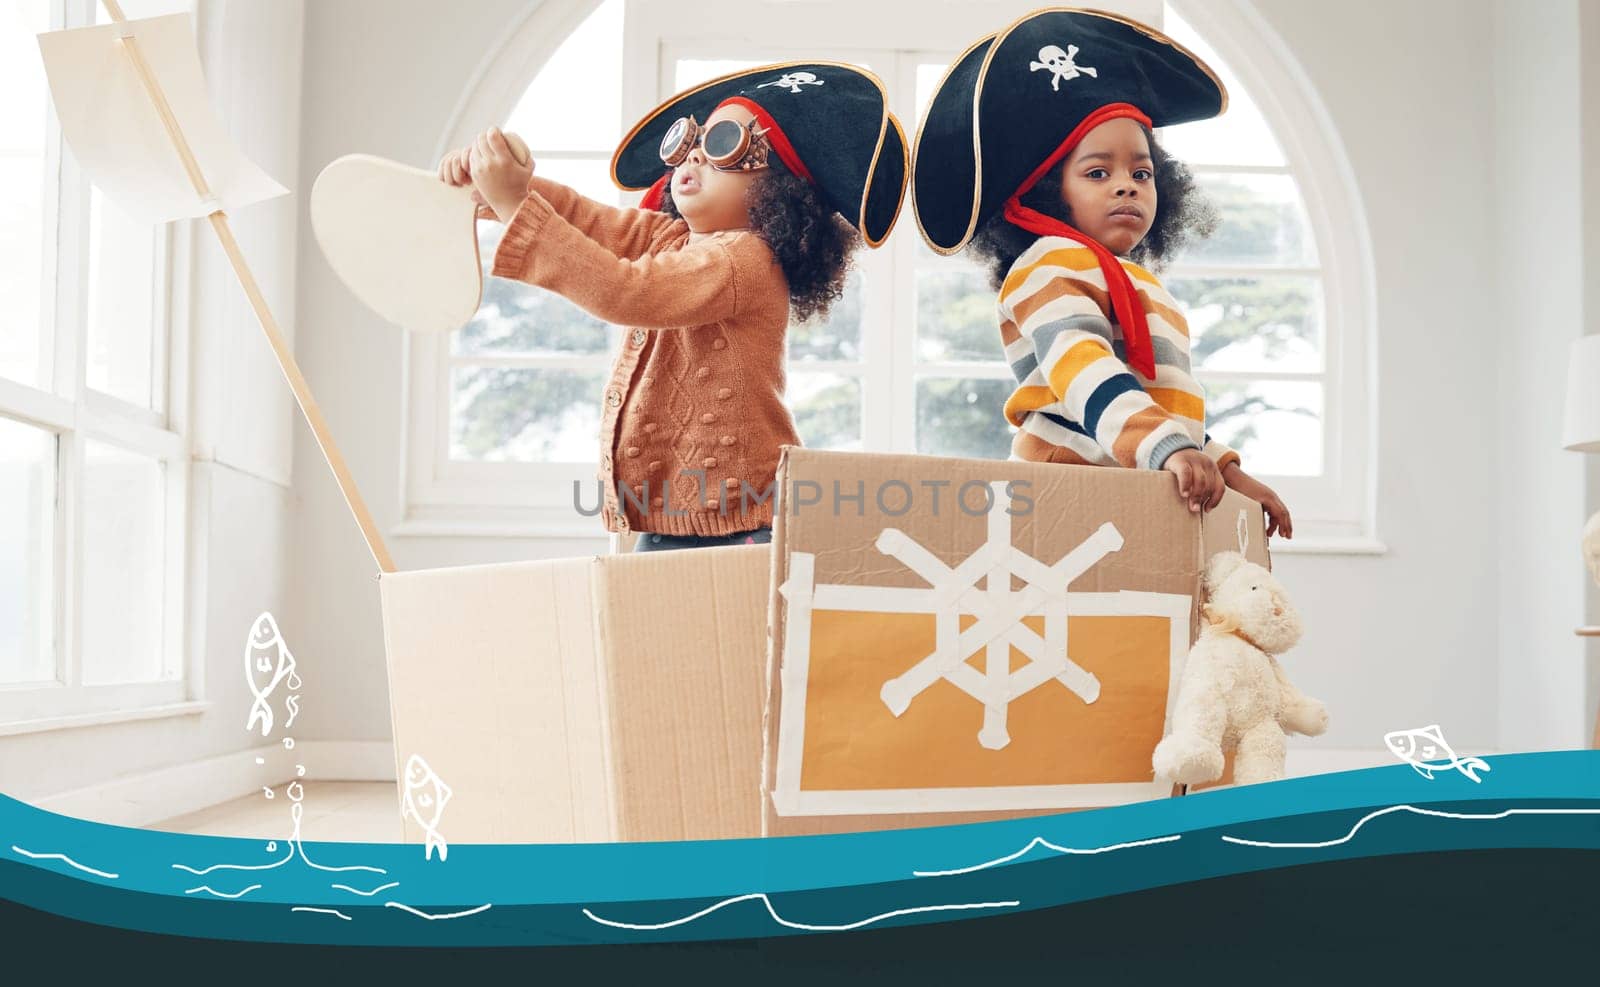 Sailing, box ship or pirate children role play, fantasy imagine or fun pretend in cardboard yacht container. Sea captain sailor, ocean boat game or portrait black kids on Halloween cruise adventure.